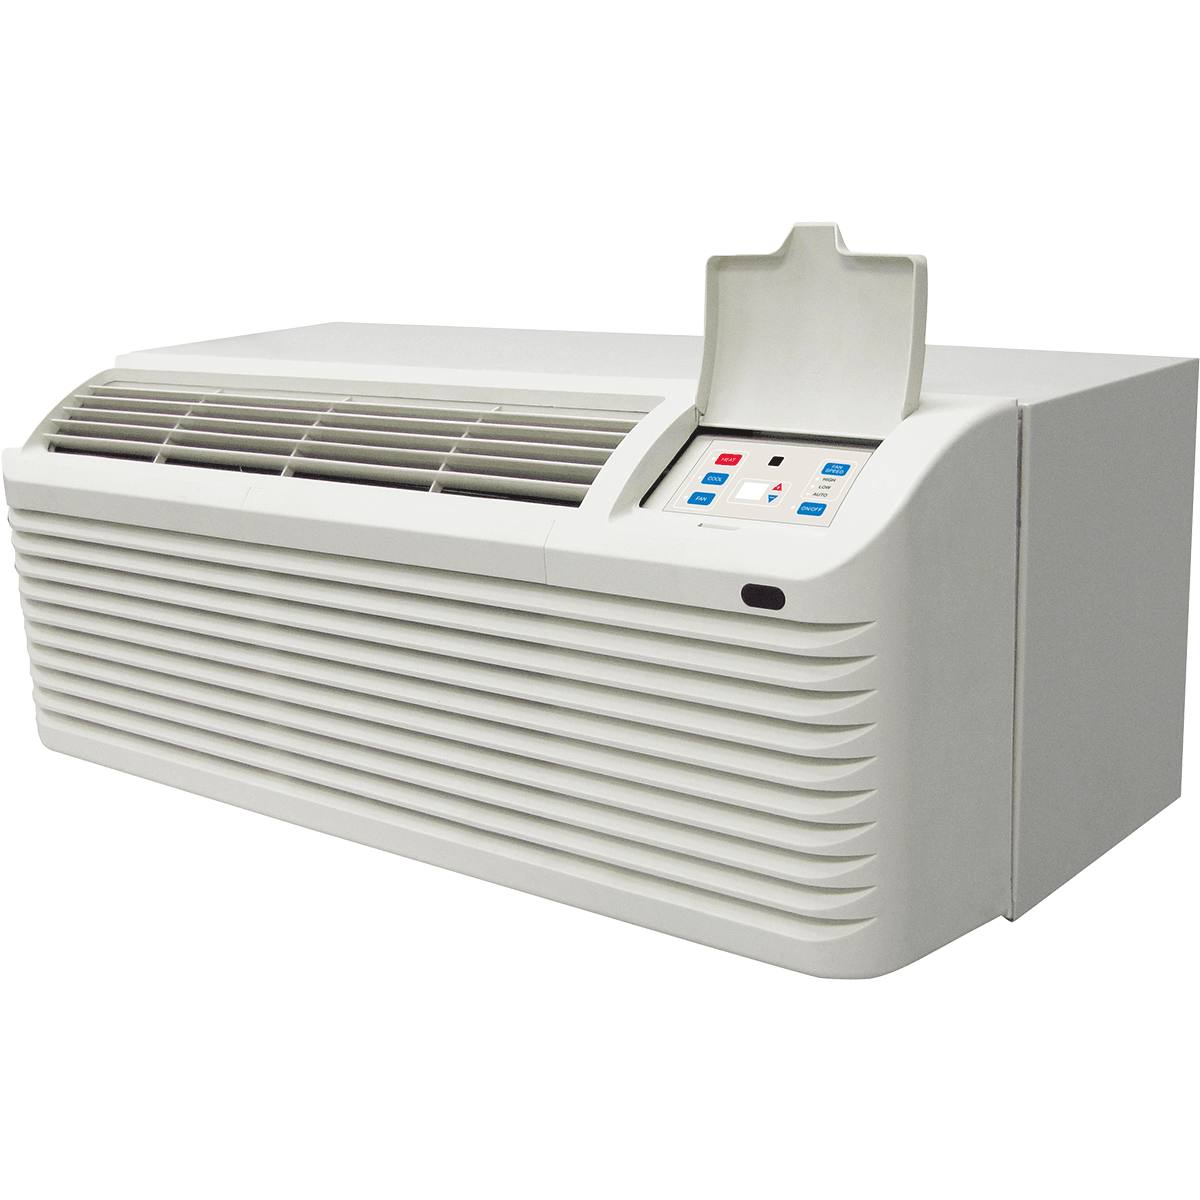 Comfort-aire 12,000 Btu Packaged Terminal Air Conditioner And Heater